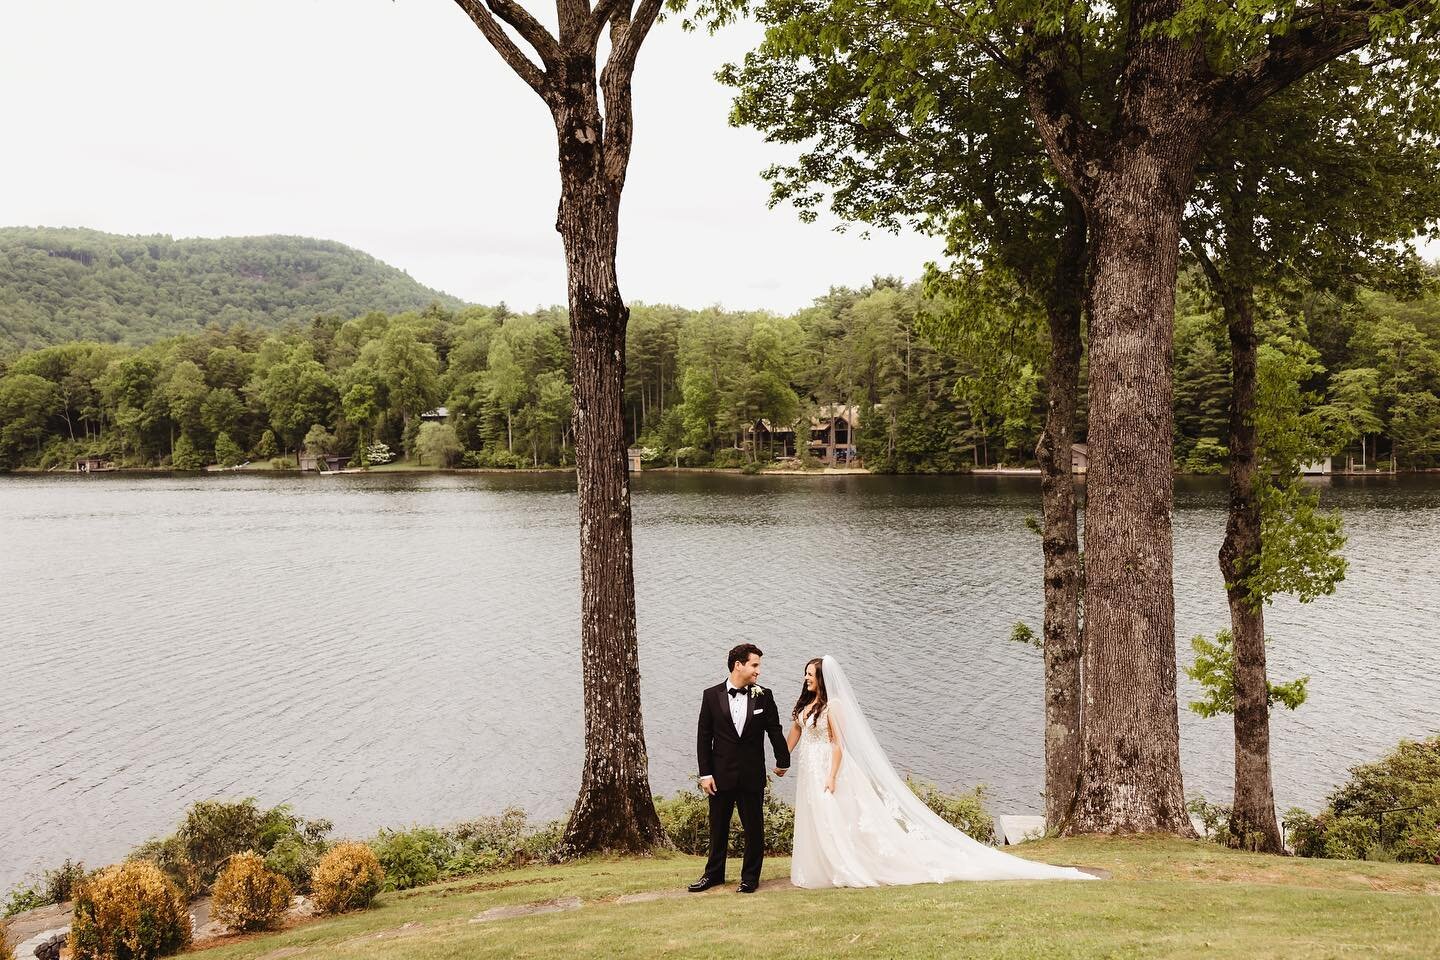 Perfectly timed pauses in the rain made for a lovely celebration at @thegreystoneinn for Taylor and Todd!

Venue @thegreystoneinn 
Planning @pinnaclewnc 
Floral design @petalandfernwnc 
Video @takeonefilmsjax 
Band @newroyalsband 
Ceremony music @all